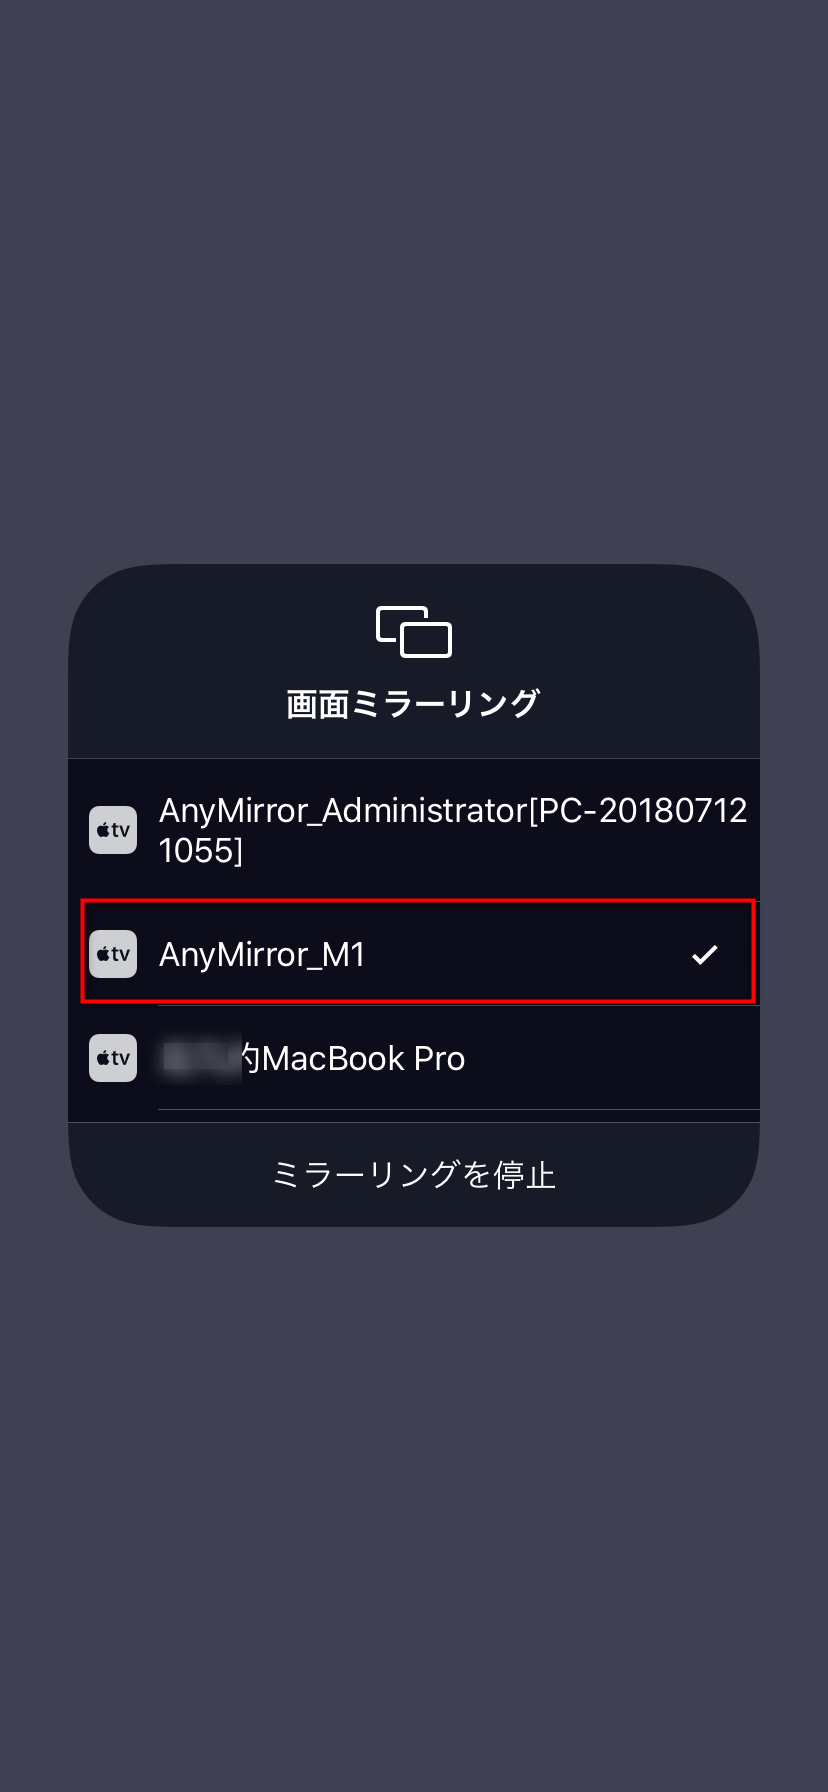 AnyMirror Mac名を選択